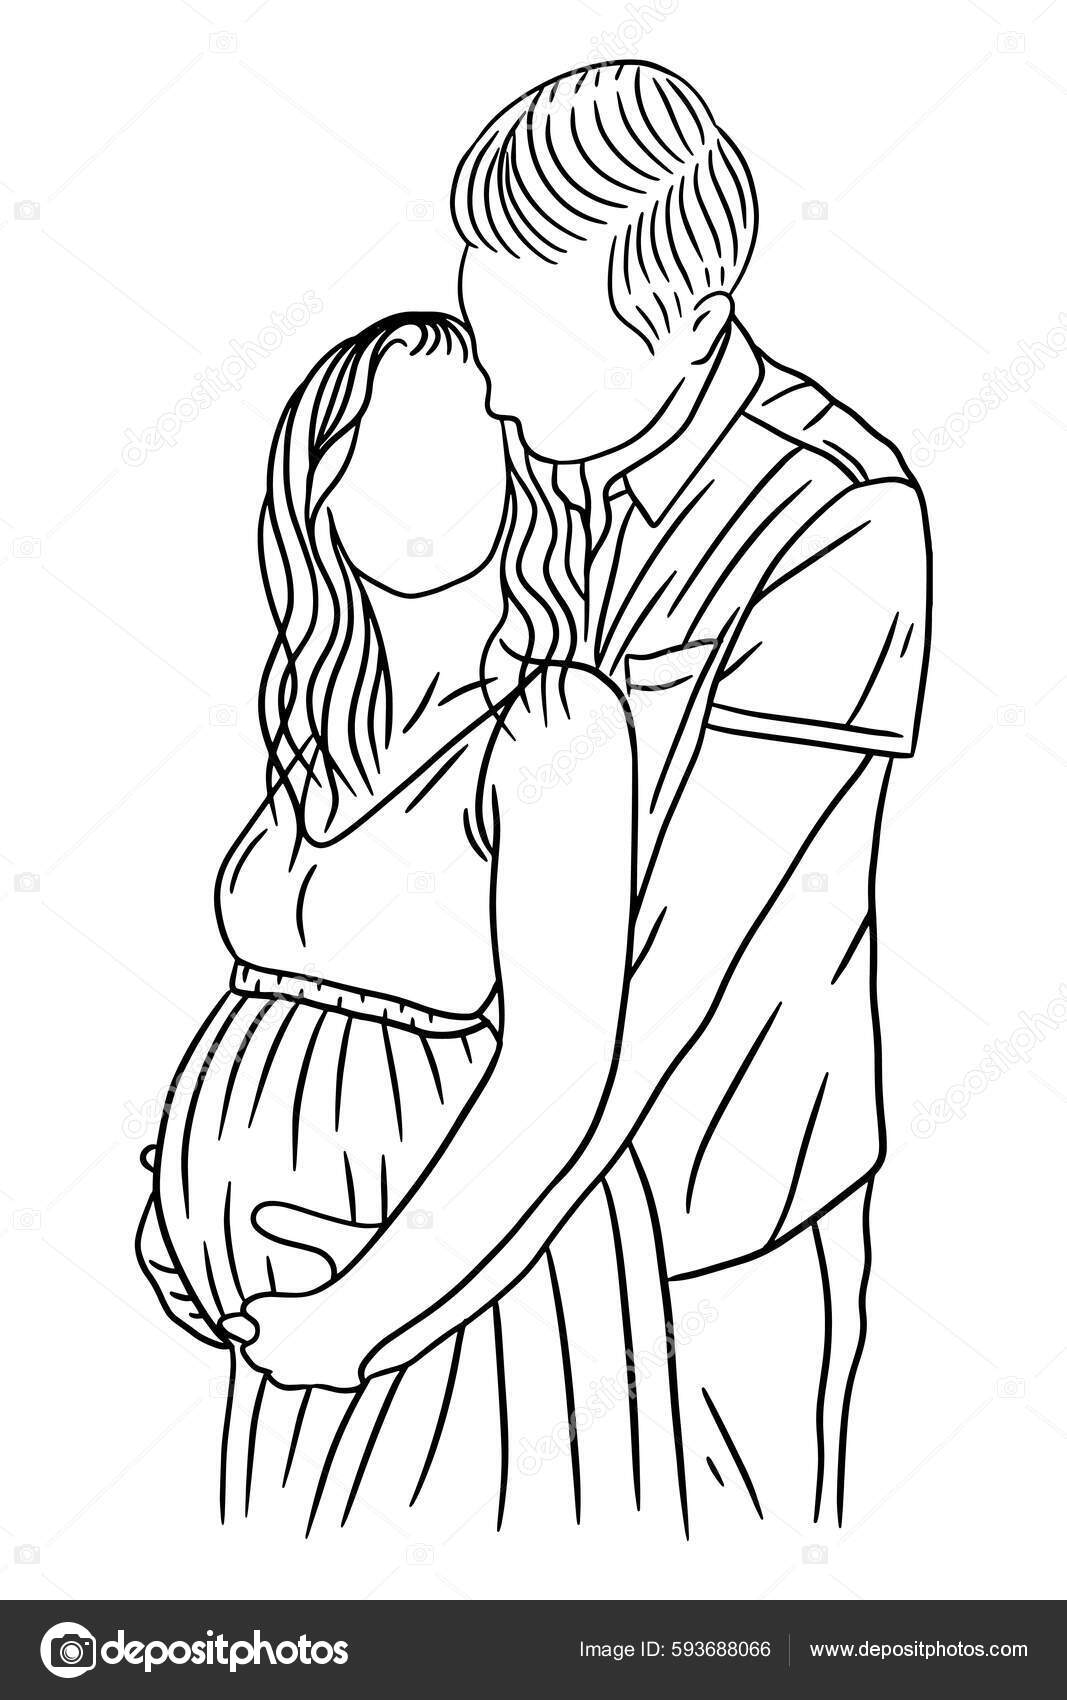 Happy Maternity Pose Pregnant Line Art Graphic by morspective